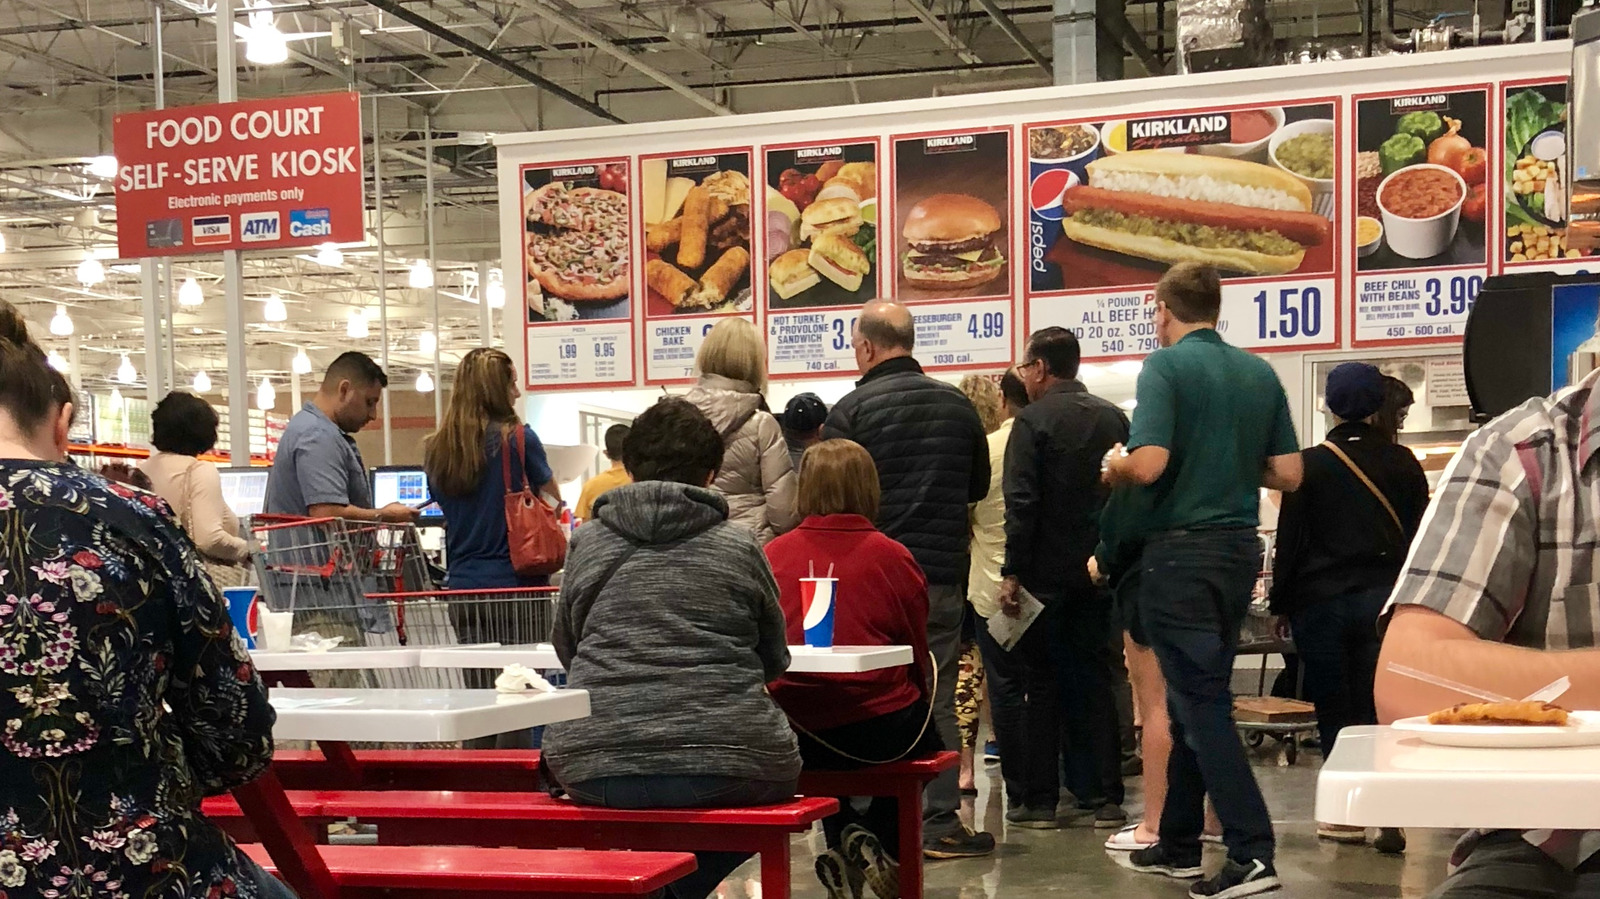 Sam #39 s Club Vs Costco: Who #39 s Winning The Battle For Best Food Court?